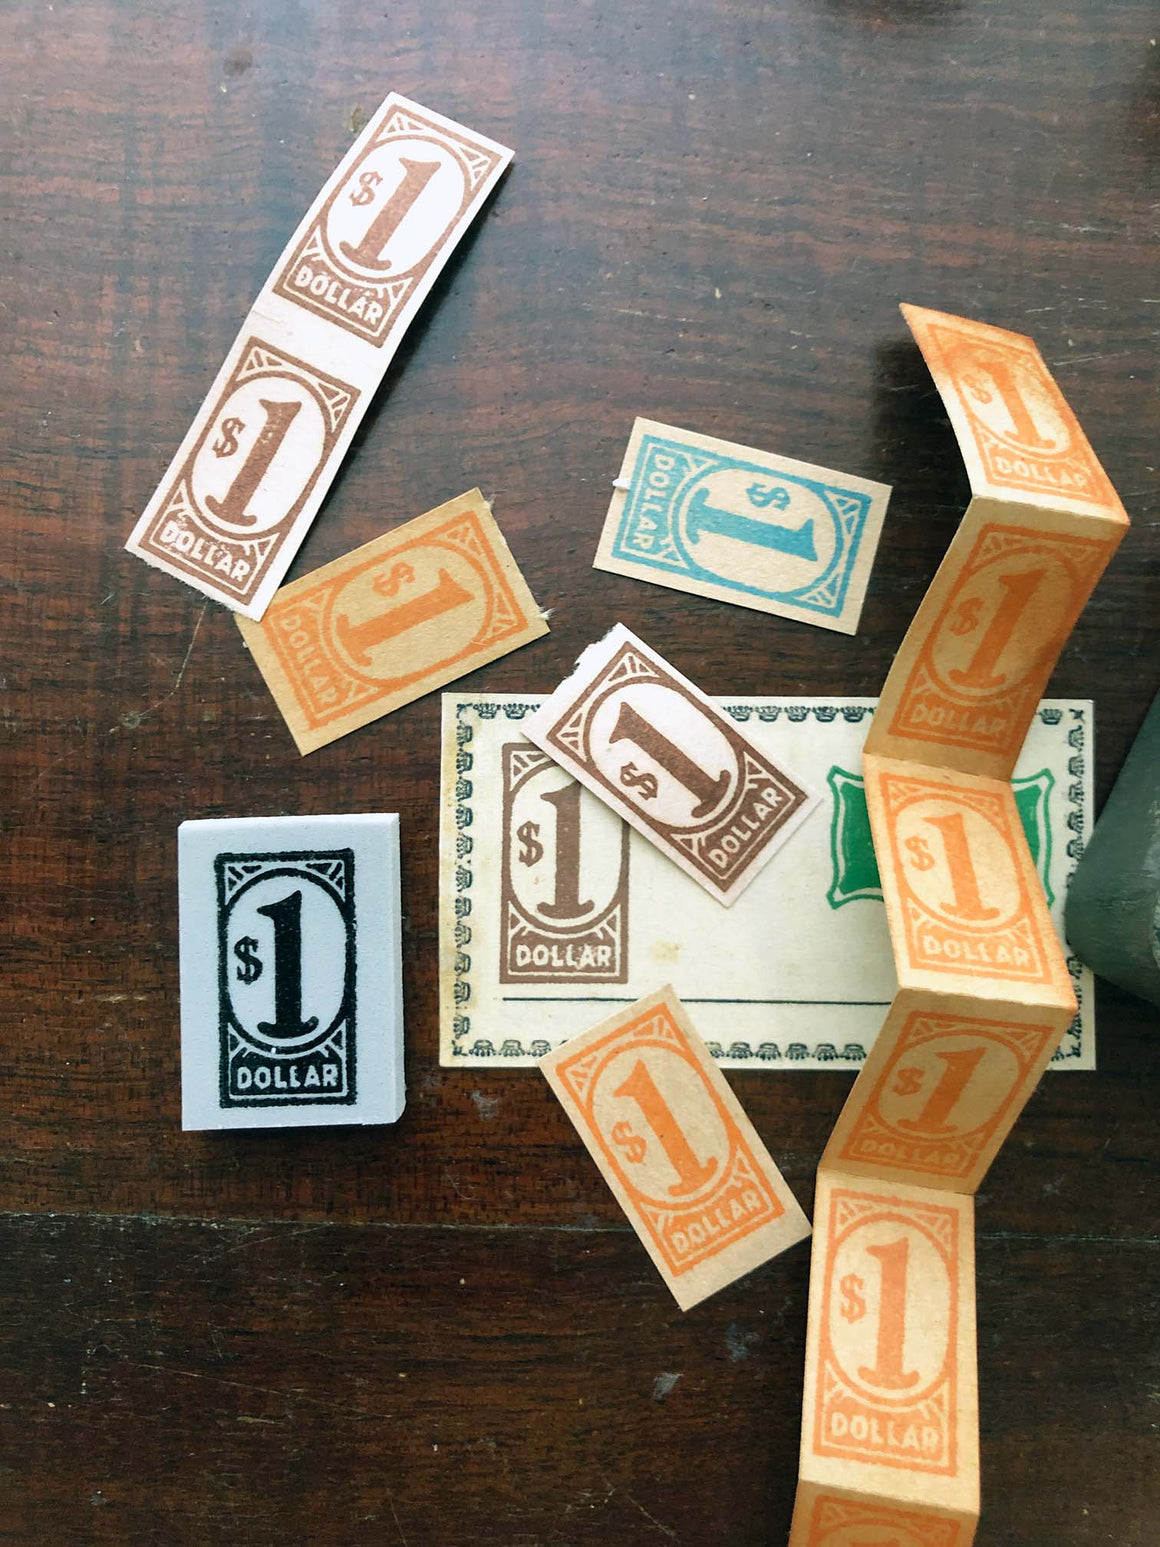 Dollar Ticket (チケット $1.00) ハンコ) mini Rubber Stamp - by Mic Moc at micmoc.com at Mic Moc